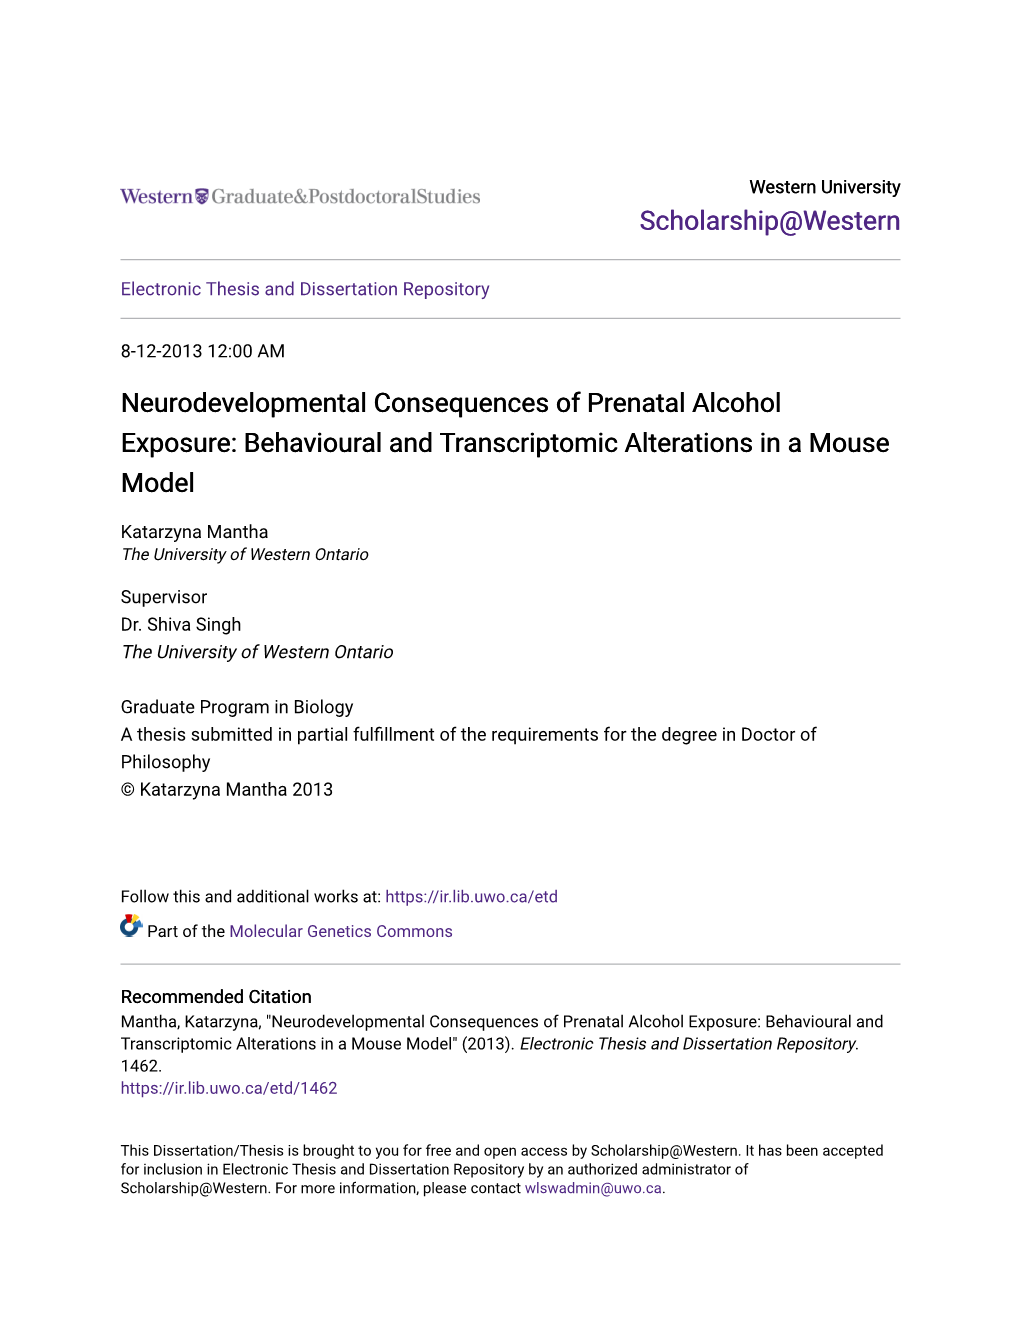 Neurodevelopmental Consequences of Prenatal Alcohol Exposure: Behavioural and Transcriptomic Alterations in a Mouse Model